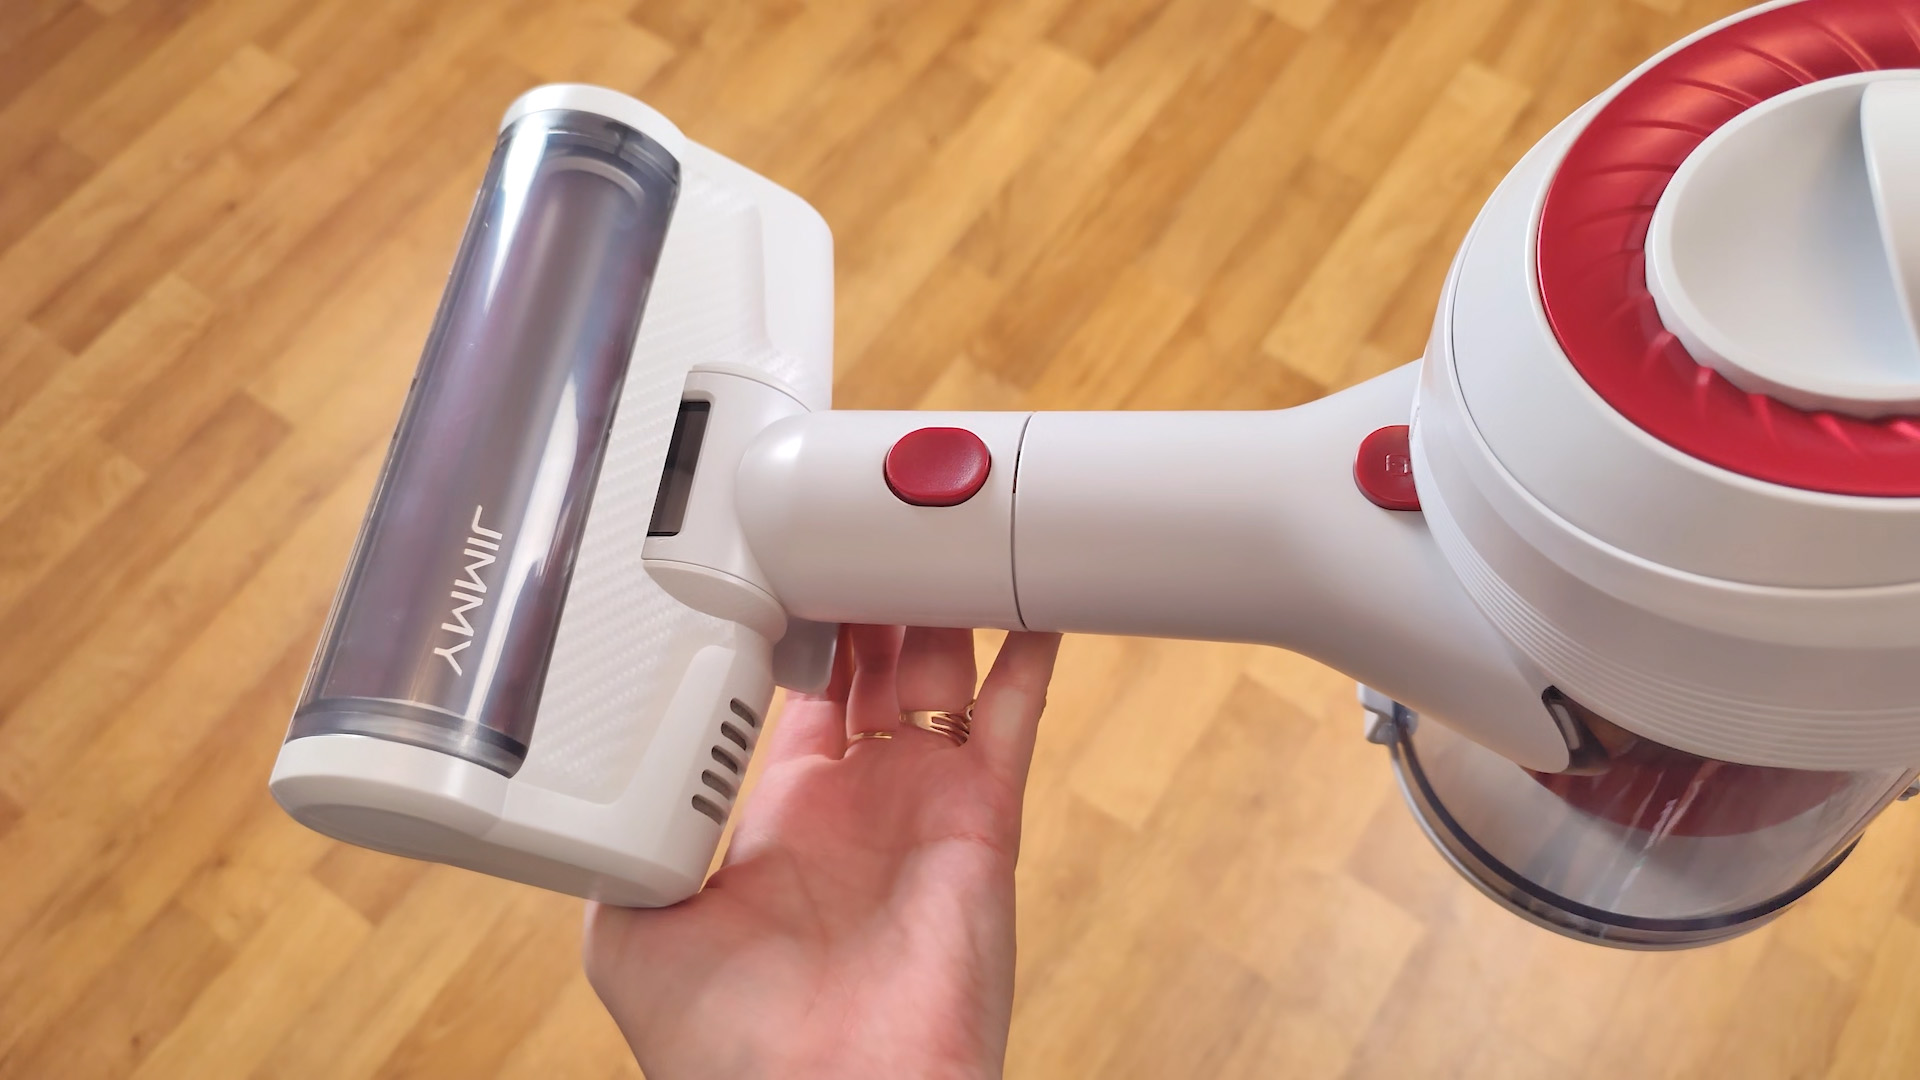 Jimmy JV51 cordless vacuum cleaner review - turbo wool brush